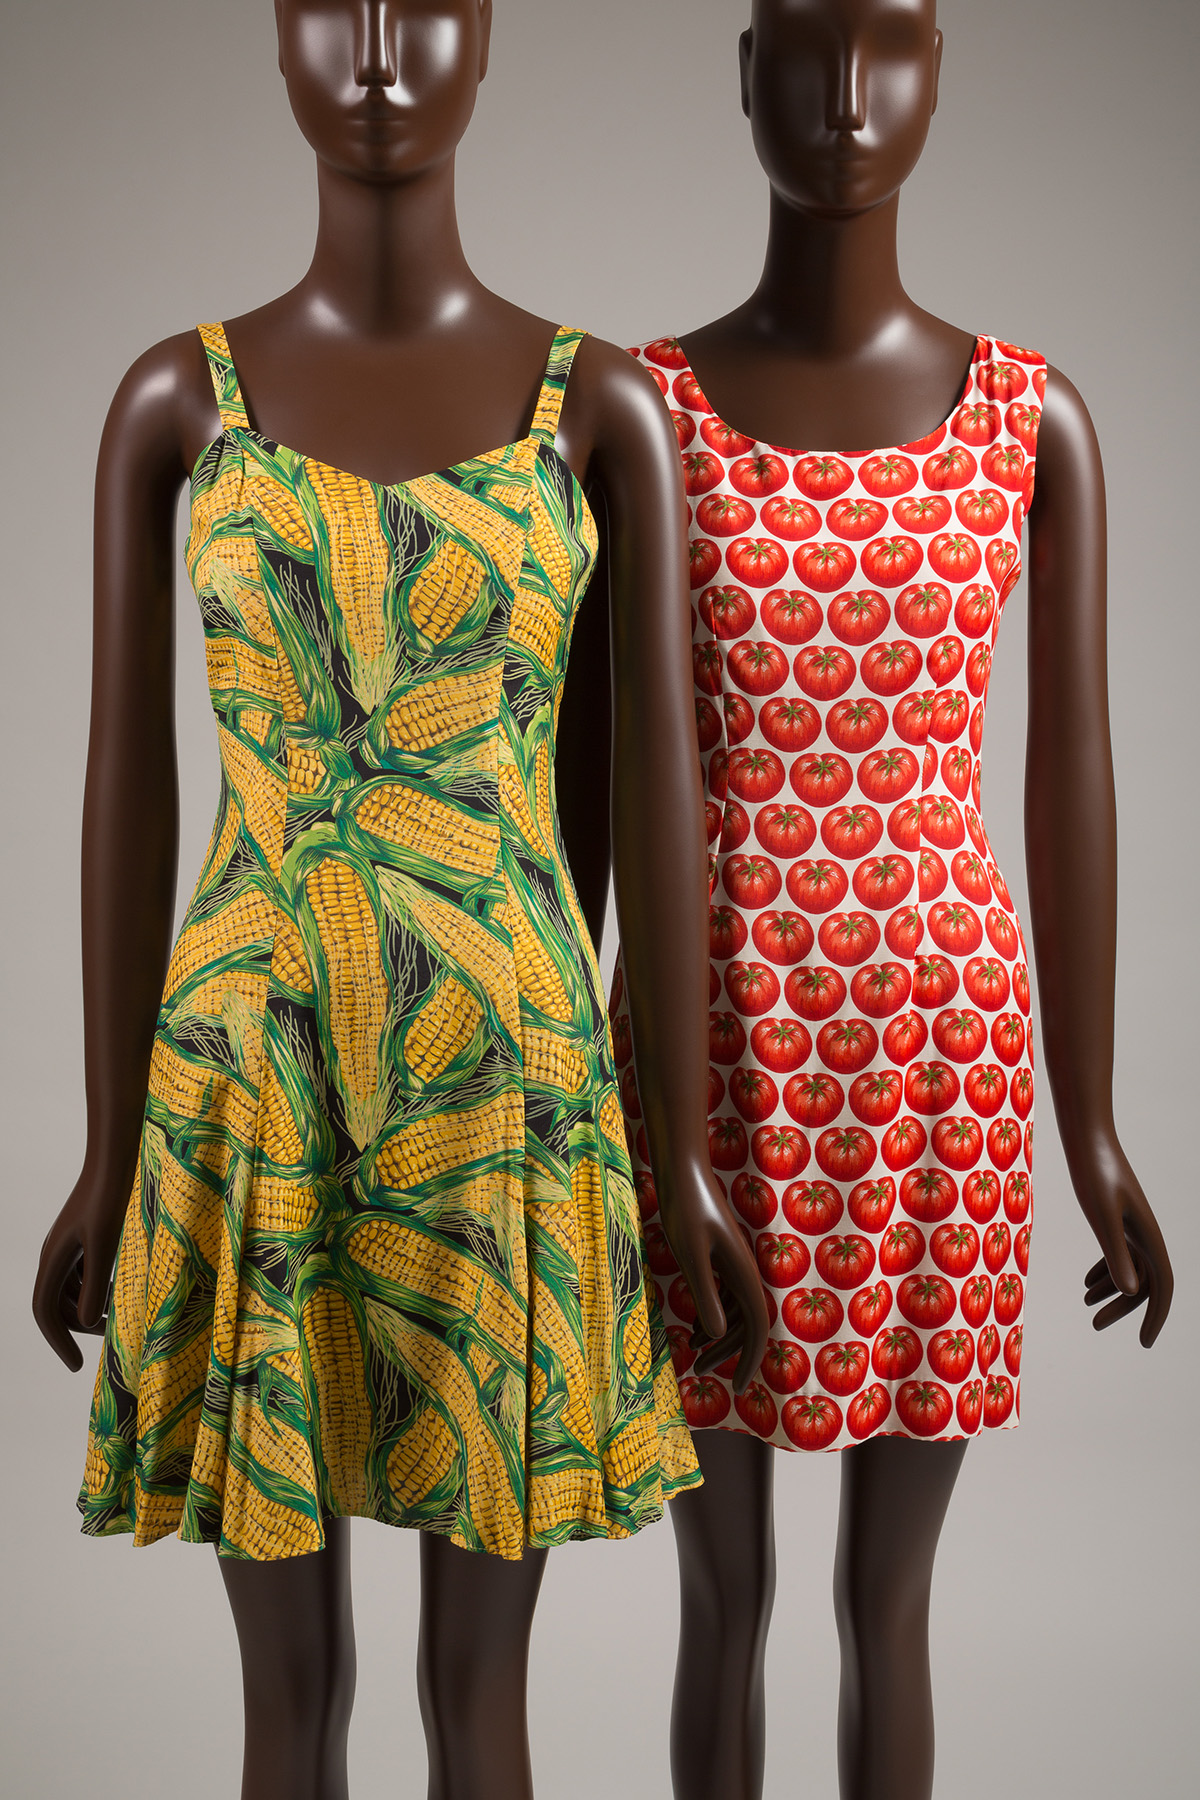 two dresses, one corn printed and one tomato printed